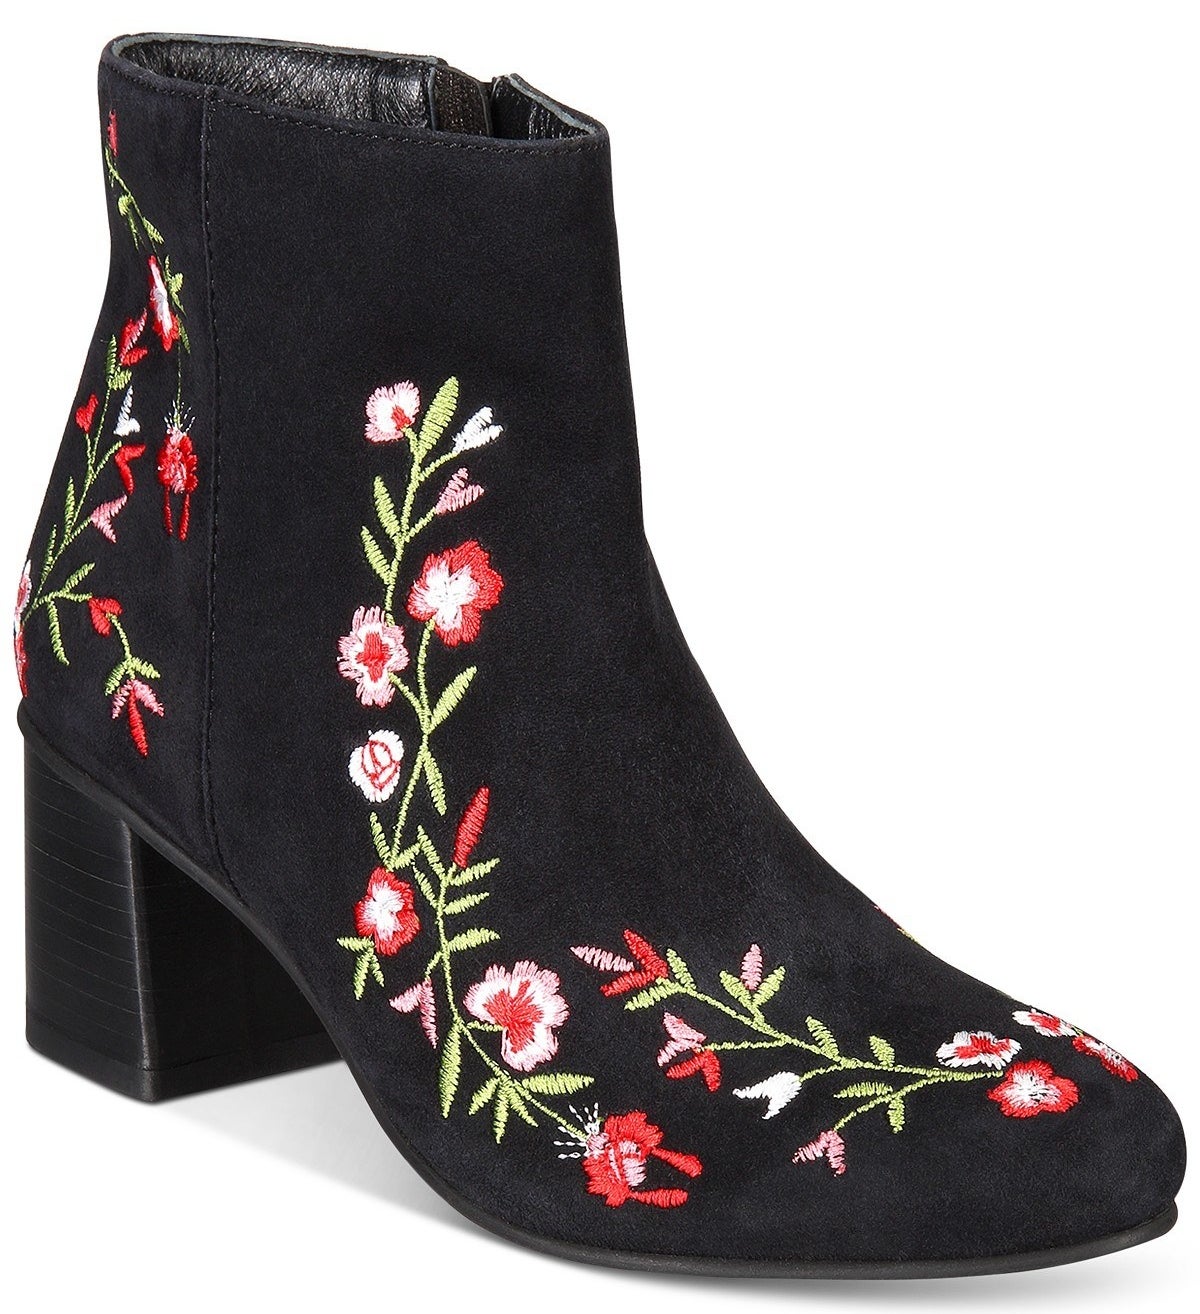 23 Pairs Of Boots You'll Want To Wear With Basically Every Outfit